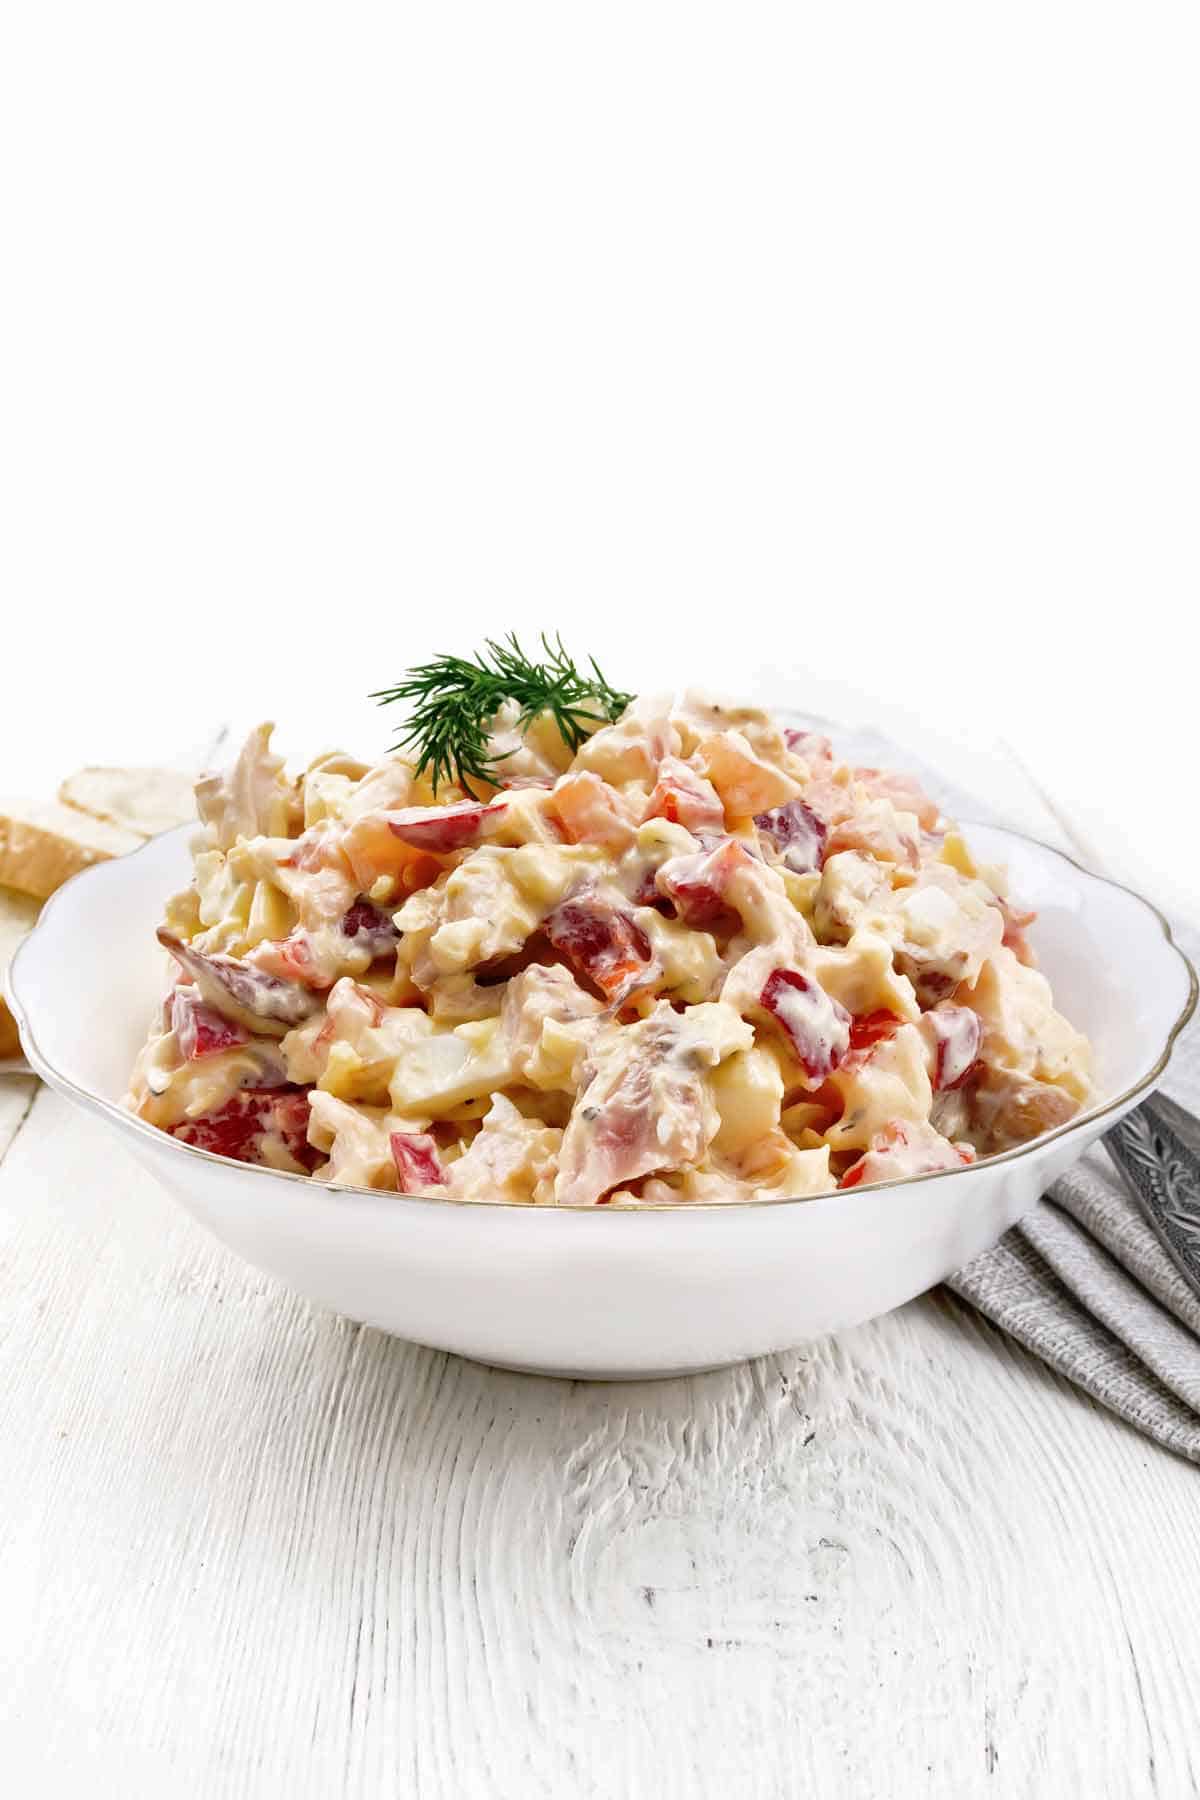 Bowl of chicken salad with a white background.